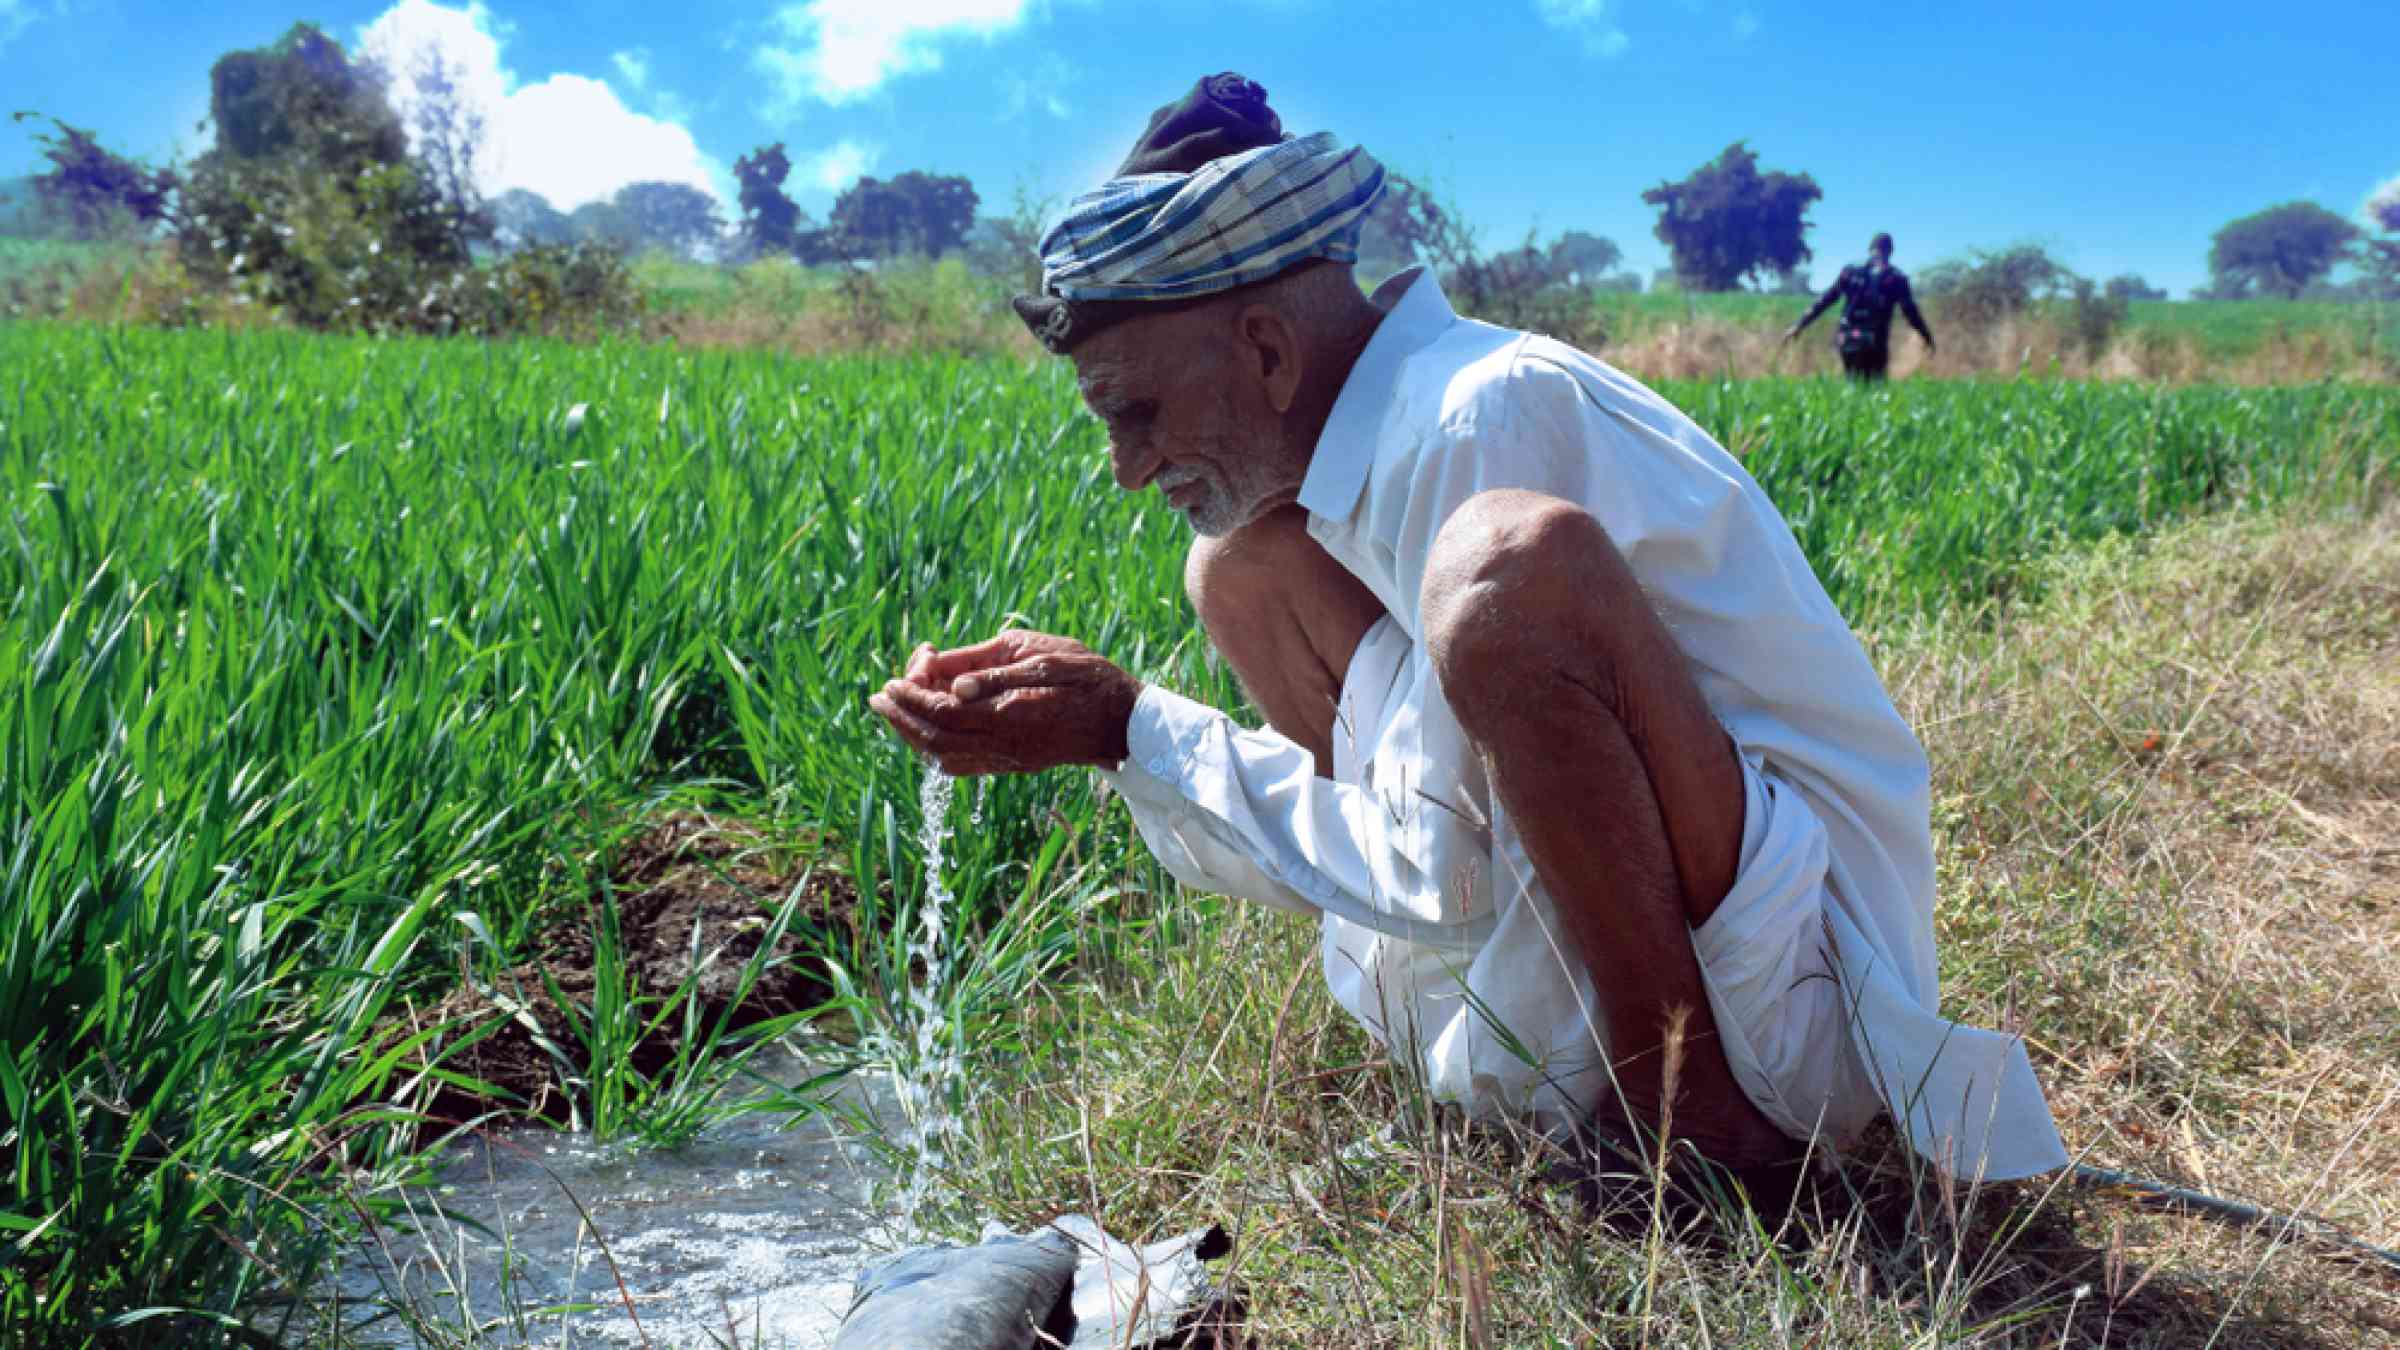 An elderly Indian farmer reaches for a drink of water during a sweltering day